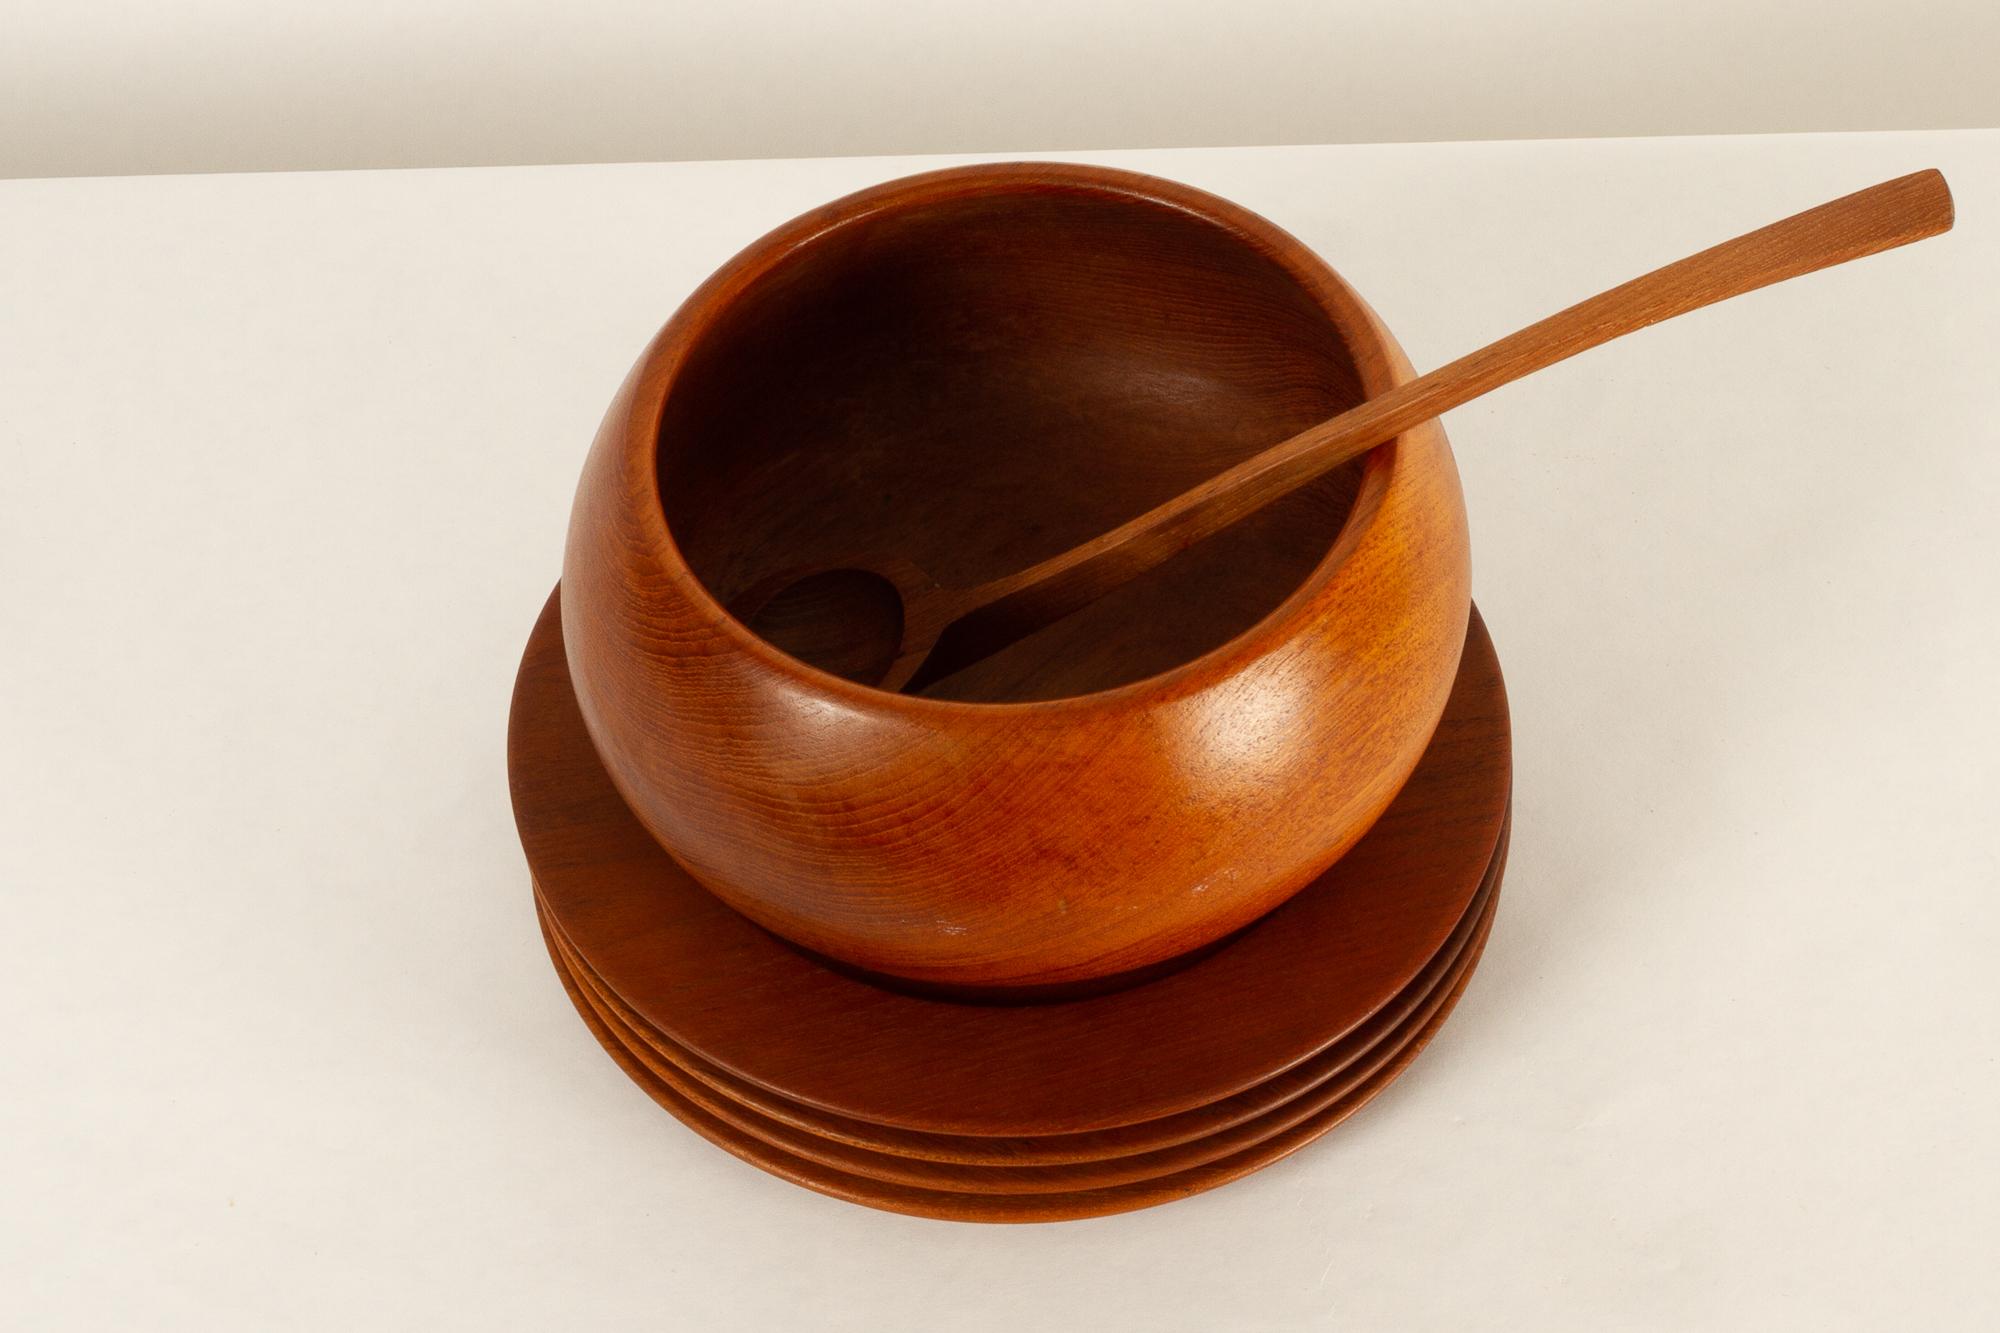 Danish vintage teak plates and bowl 1960s, set of 6.
Mid-Century Modern Danish tableware in teak.
This set consists of:
Four teak serving plates by Wiggers Denmark, diameter 28 cm.
A large bowl in solid teak, diameter 24 cm.
A spoon in solid